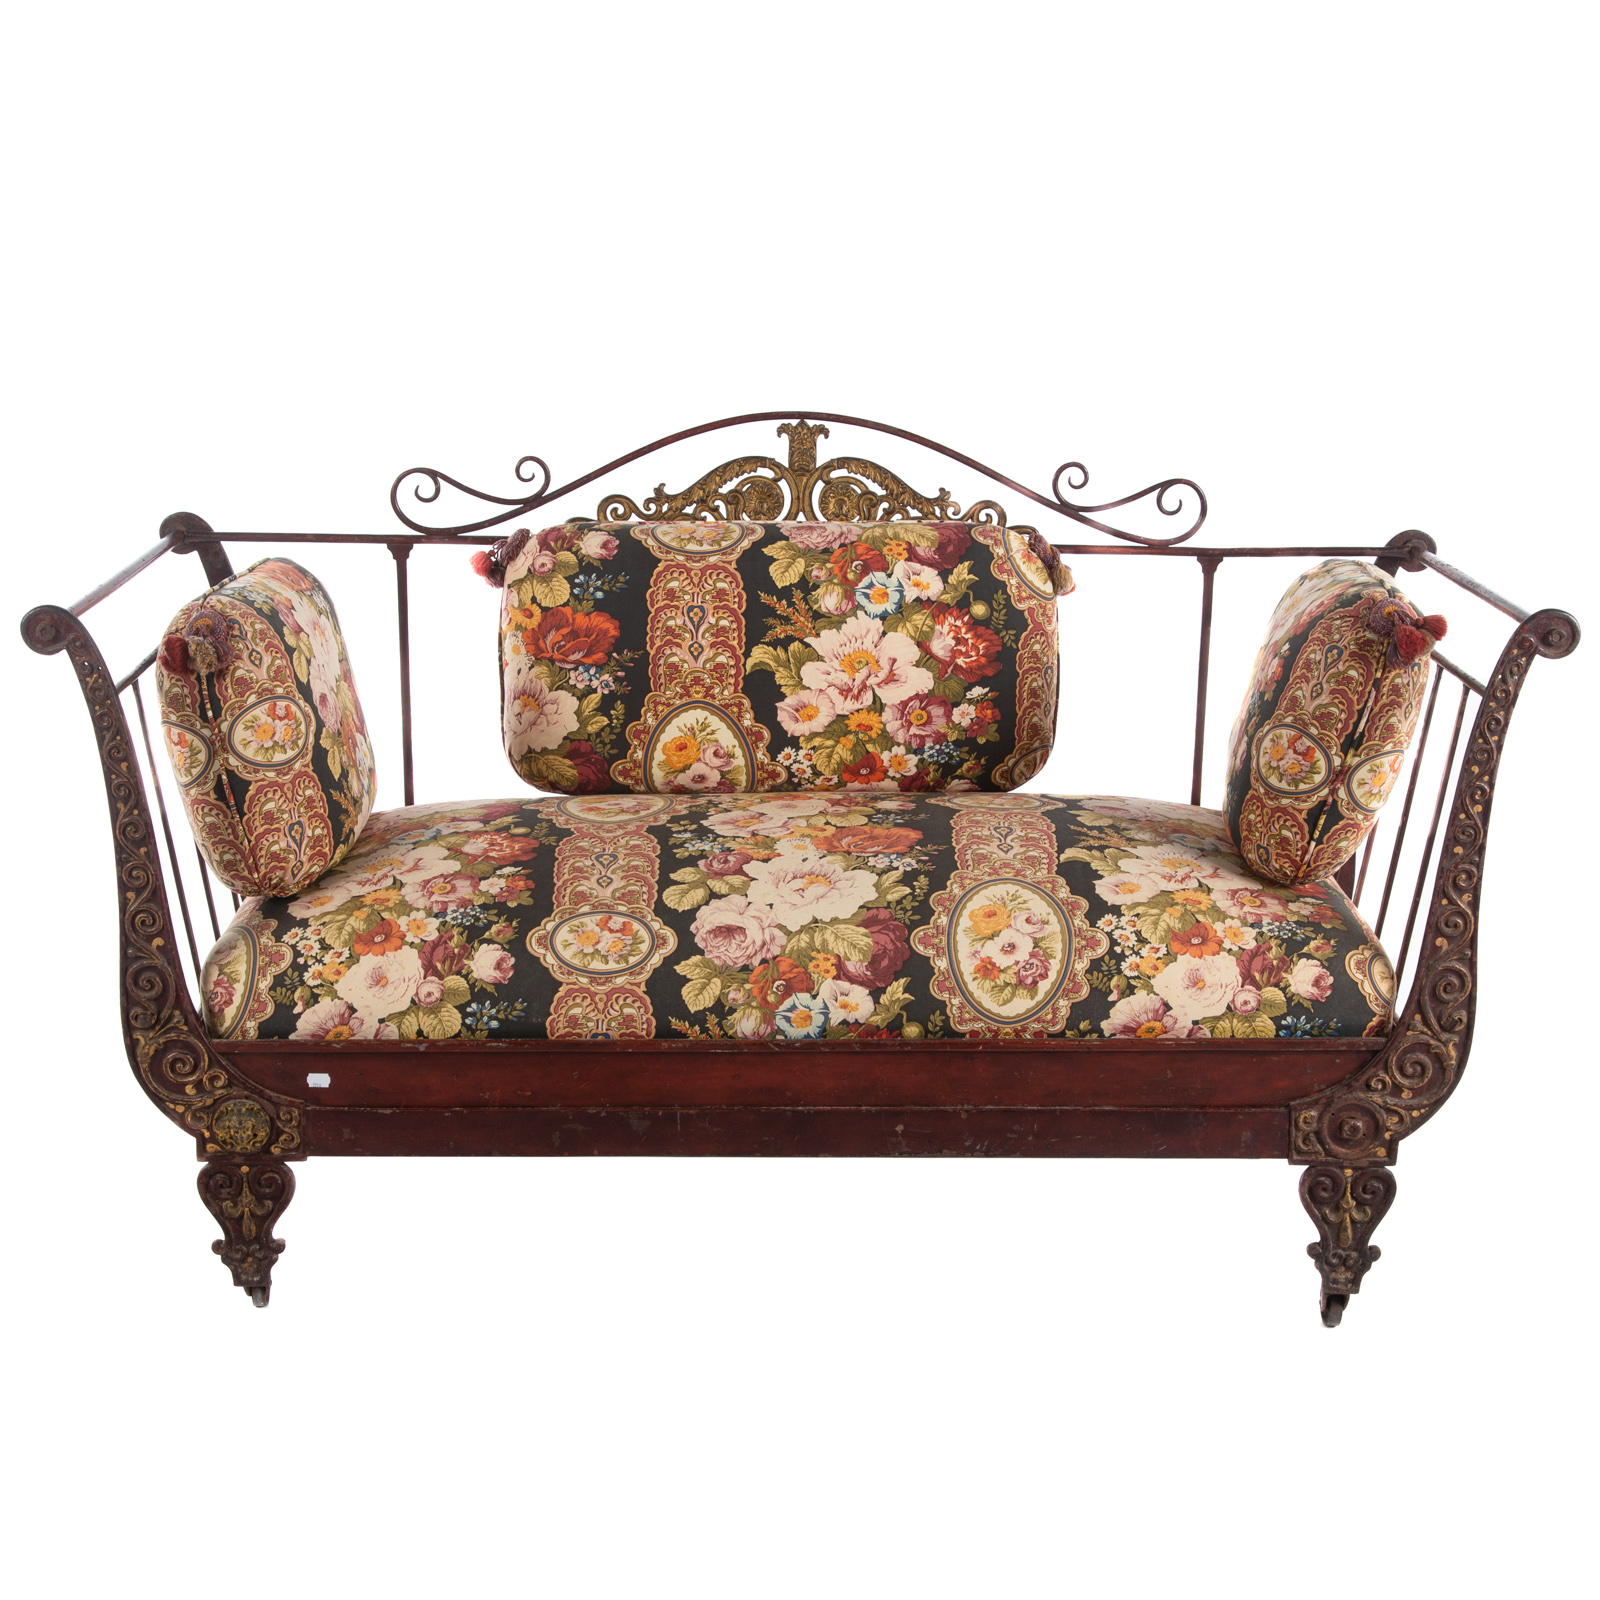 CLASSICAL STYLE CAST IRON SETTEE 3cae51